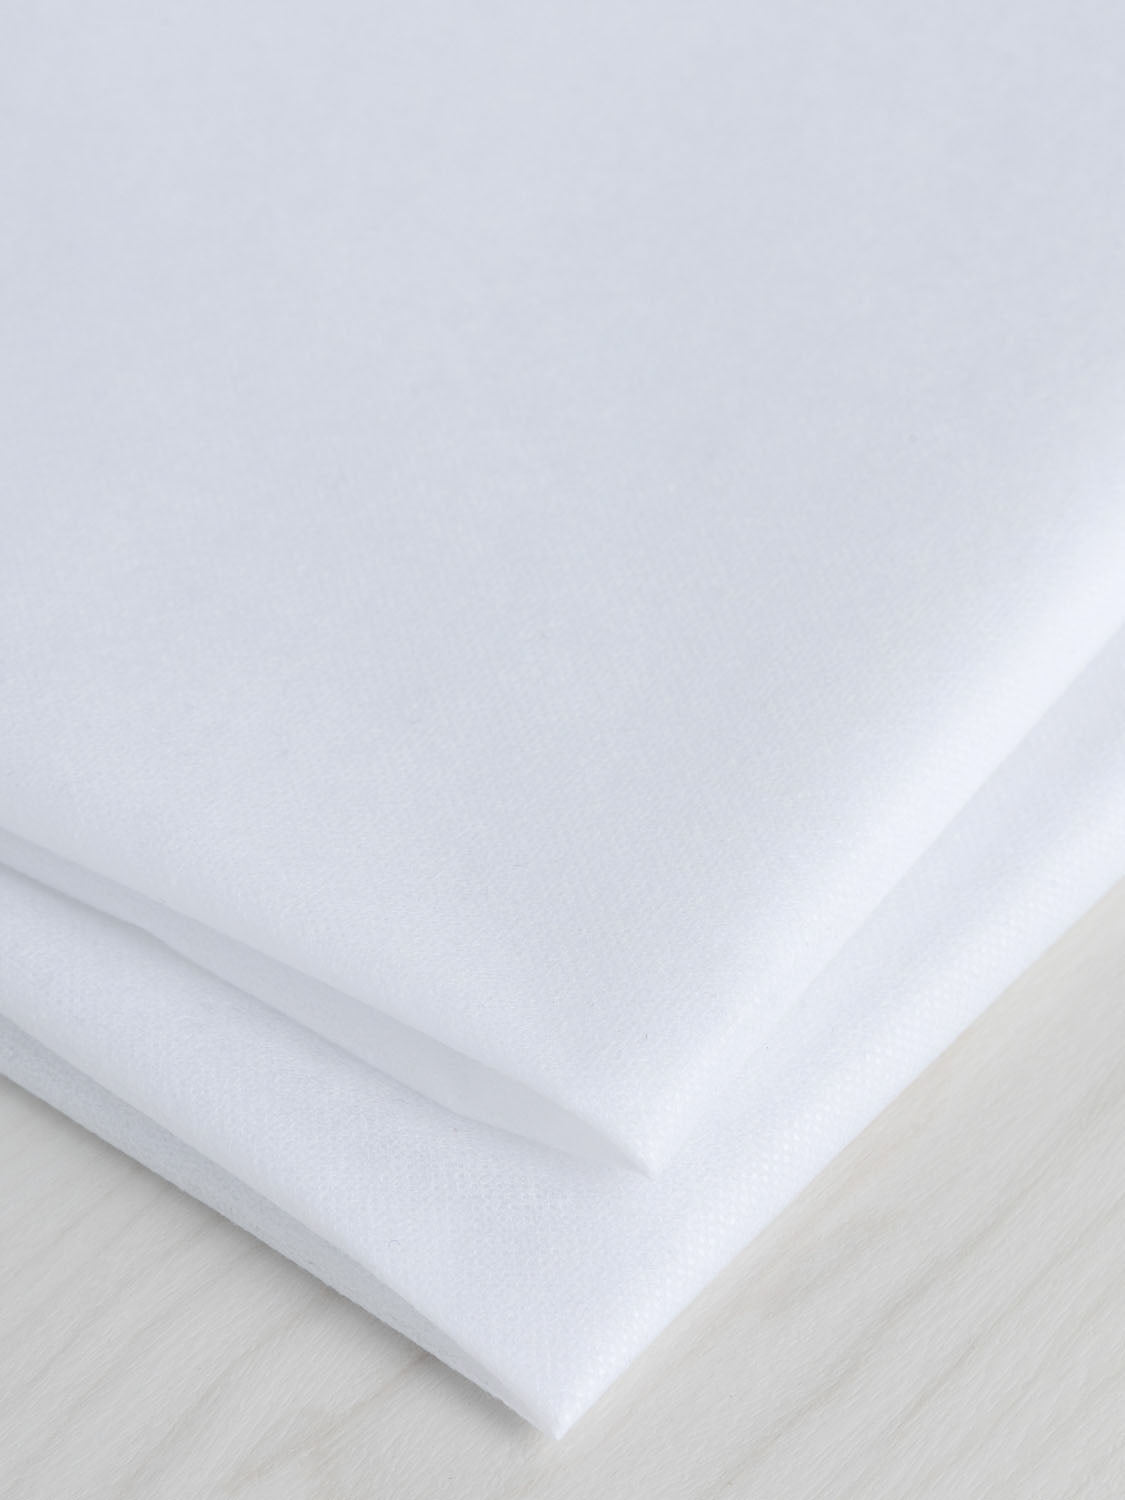 Woven - Weft Insertion Fusible Interfacing - White – Affordable